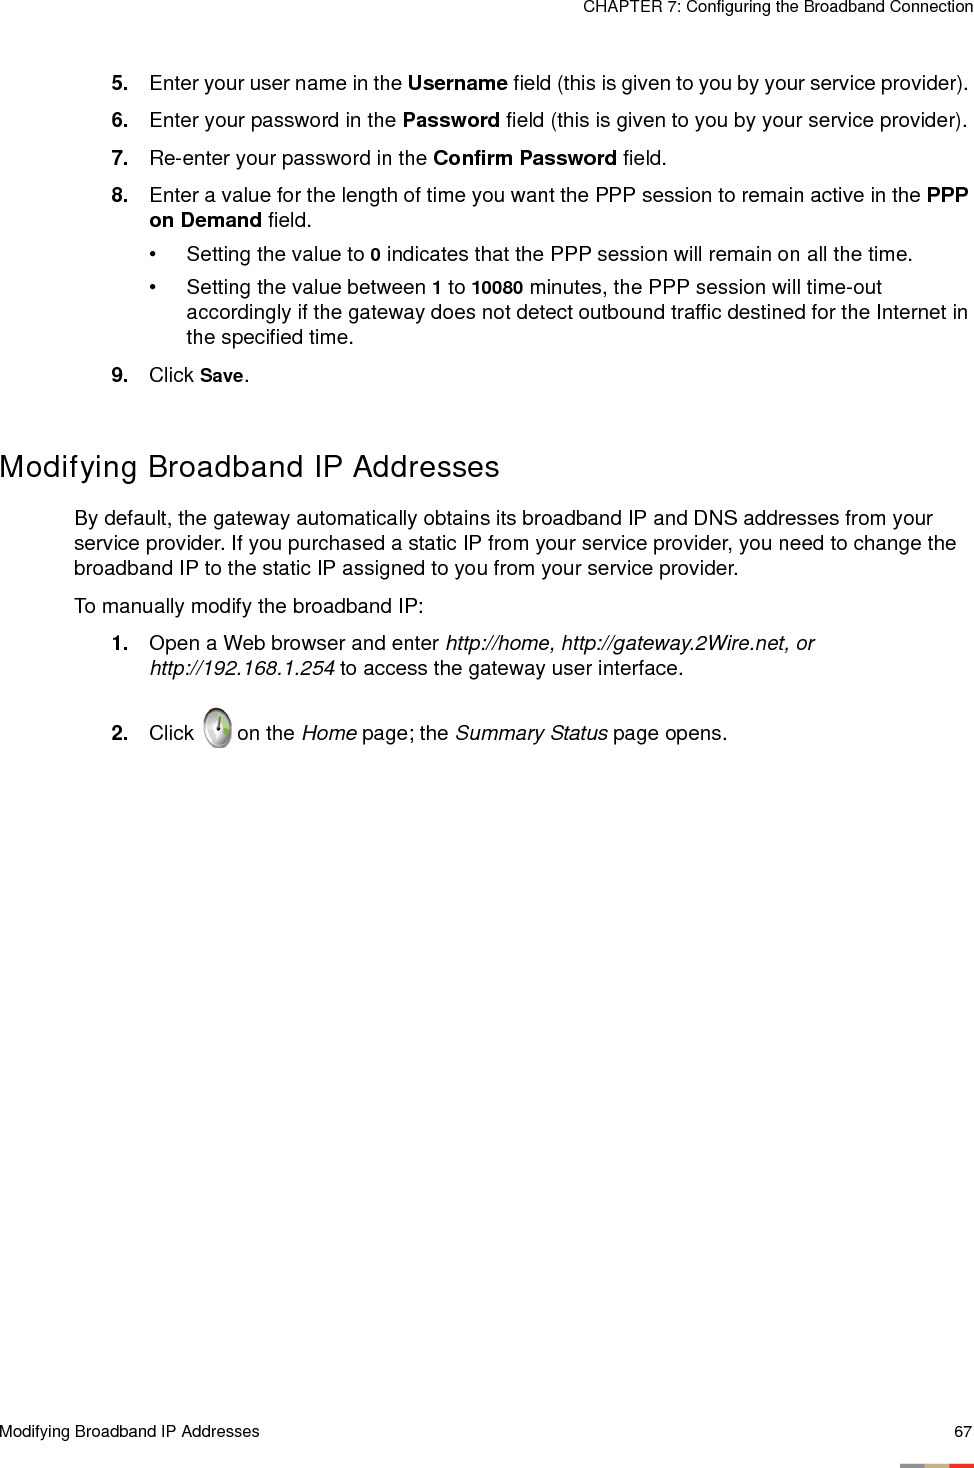 Modifying Broadband IP Addresses 67CHAPTER 7: Configuring the Broadband Connection5. Enter your user name in the Username field (this is given to you by your service provider). 6. Enter your password in the Password field (this is given to you by your service provider). 7. Re-enter your password in the Confirm Password field.8. Enter a value for the length of time you want the PPP session to remain active in the PPP on Demand field. • Setting the value to 0 indicates that the PPP session will remain on all the time.• Setting the value between 1 to 10080 minutes, the PPP session will time-out accordingly if the gateway does not detect outbound traffic destined for the Internet in the specified time. 9. Click Save.Modifying Broadband IP AddressesBy default, the gateway automatically obtains its broadband IP and DNS addresses from your service provider. If you purchased a static IP from your service provider, you need to change the broadband IP to the static IP assigned to you from your service provider.To manually modify the broadband IP: 1. Open a Web browser and enter http://home, http://gateway.2Wire.net, or http://192.168.1.254 to access the gateway user interface. 2. Click   on the Home page; the Summary Status page opens.